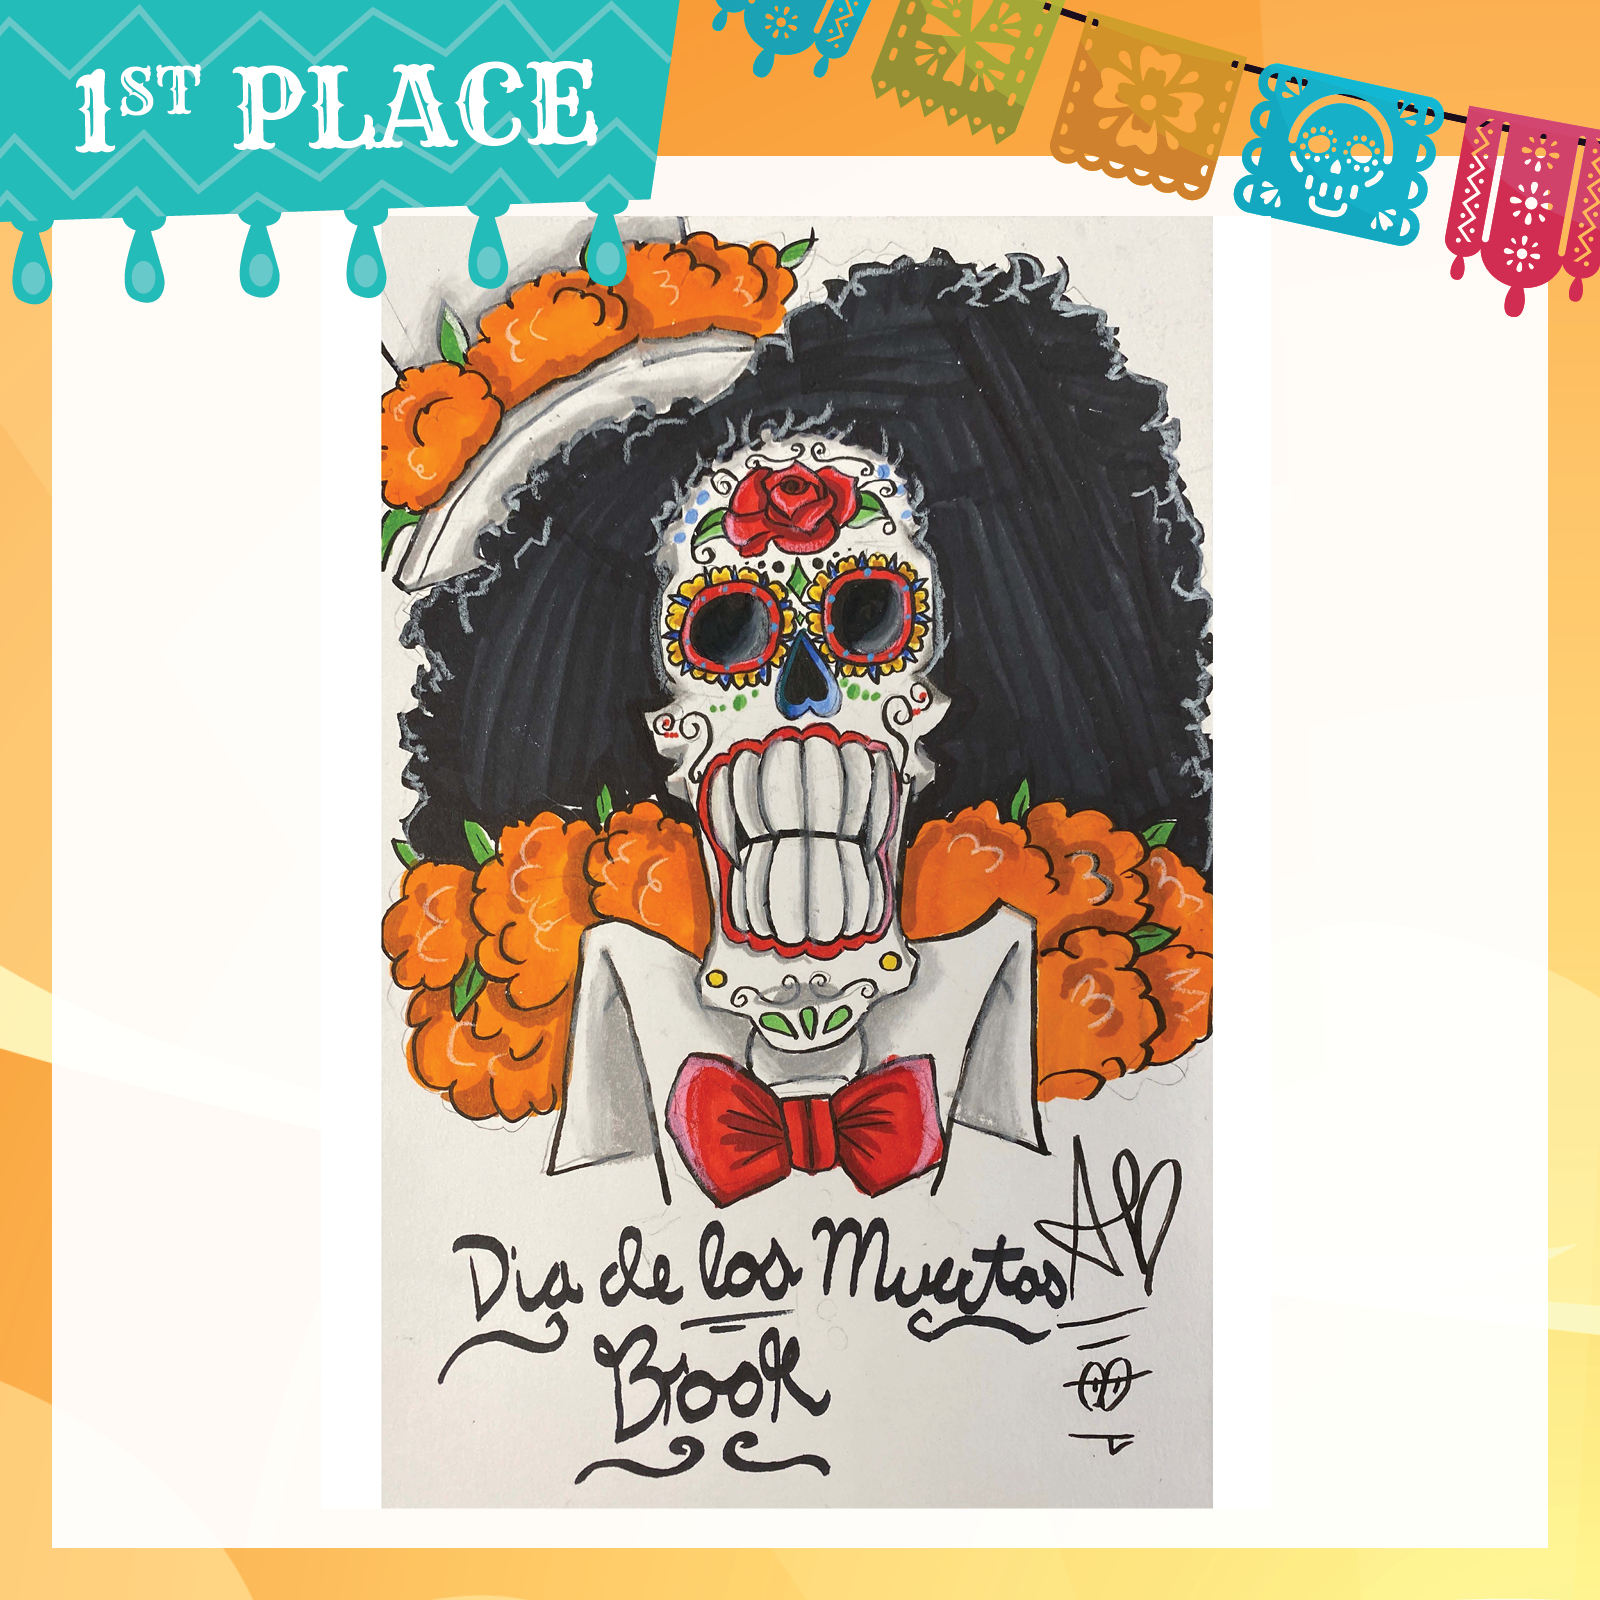 Drawing in marker of a skeleton with lots of black hair, a hat with orange flowers, a red bow tie and a big, toothy grin. Dia de los Muertos Book.